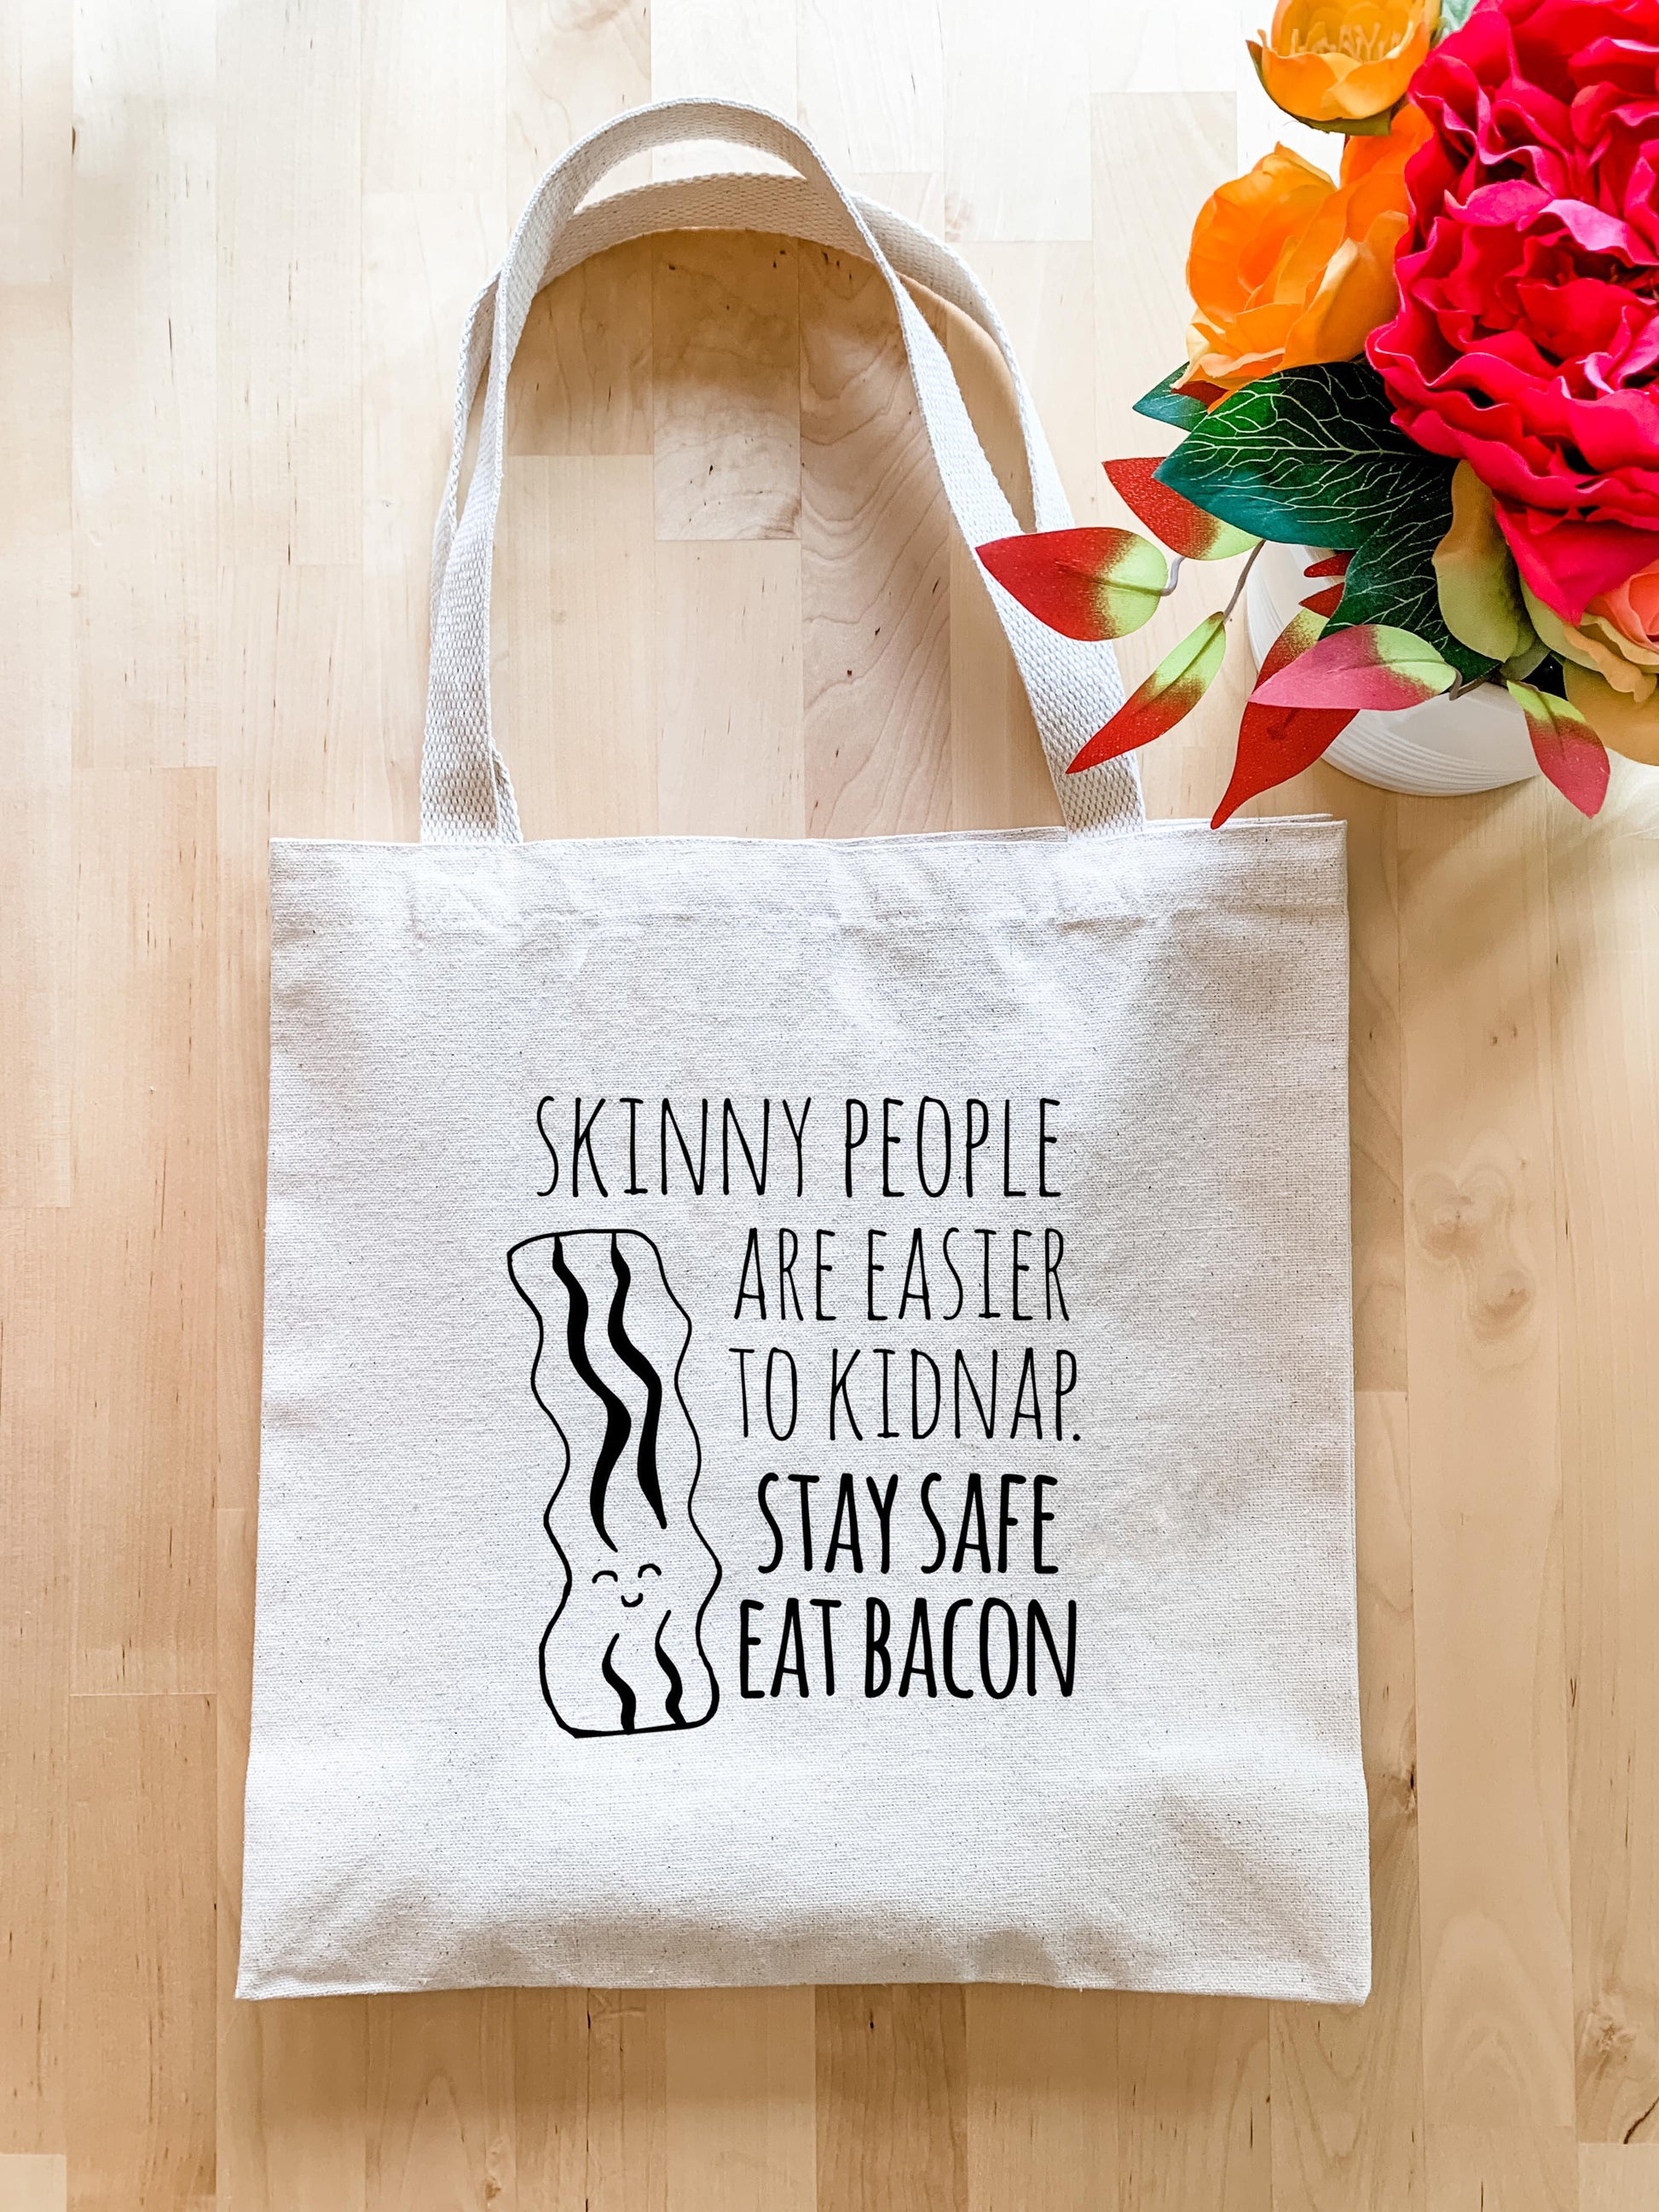 Skinny People Are Easier to Kidnap Stay Safe Eat Bacon - Tote Bag - MoonlightMakers